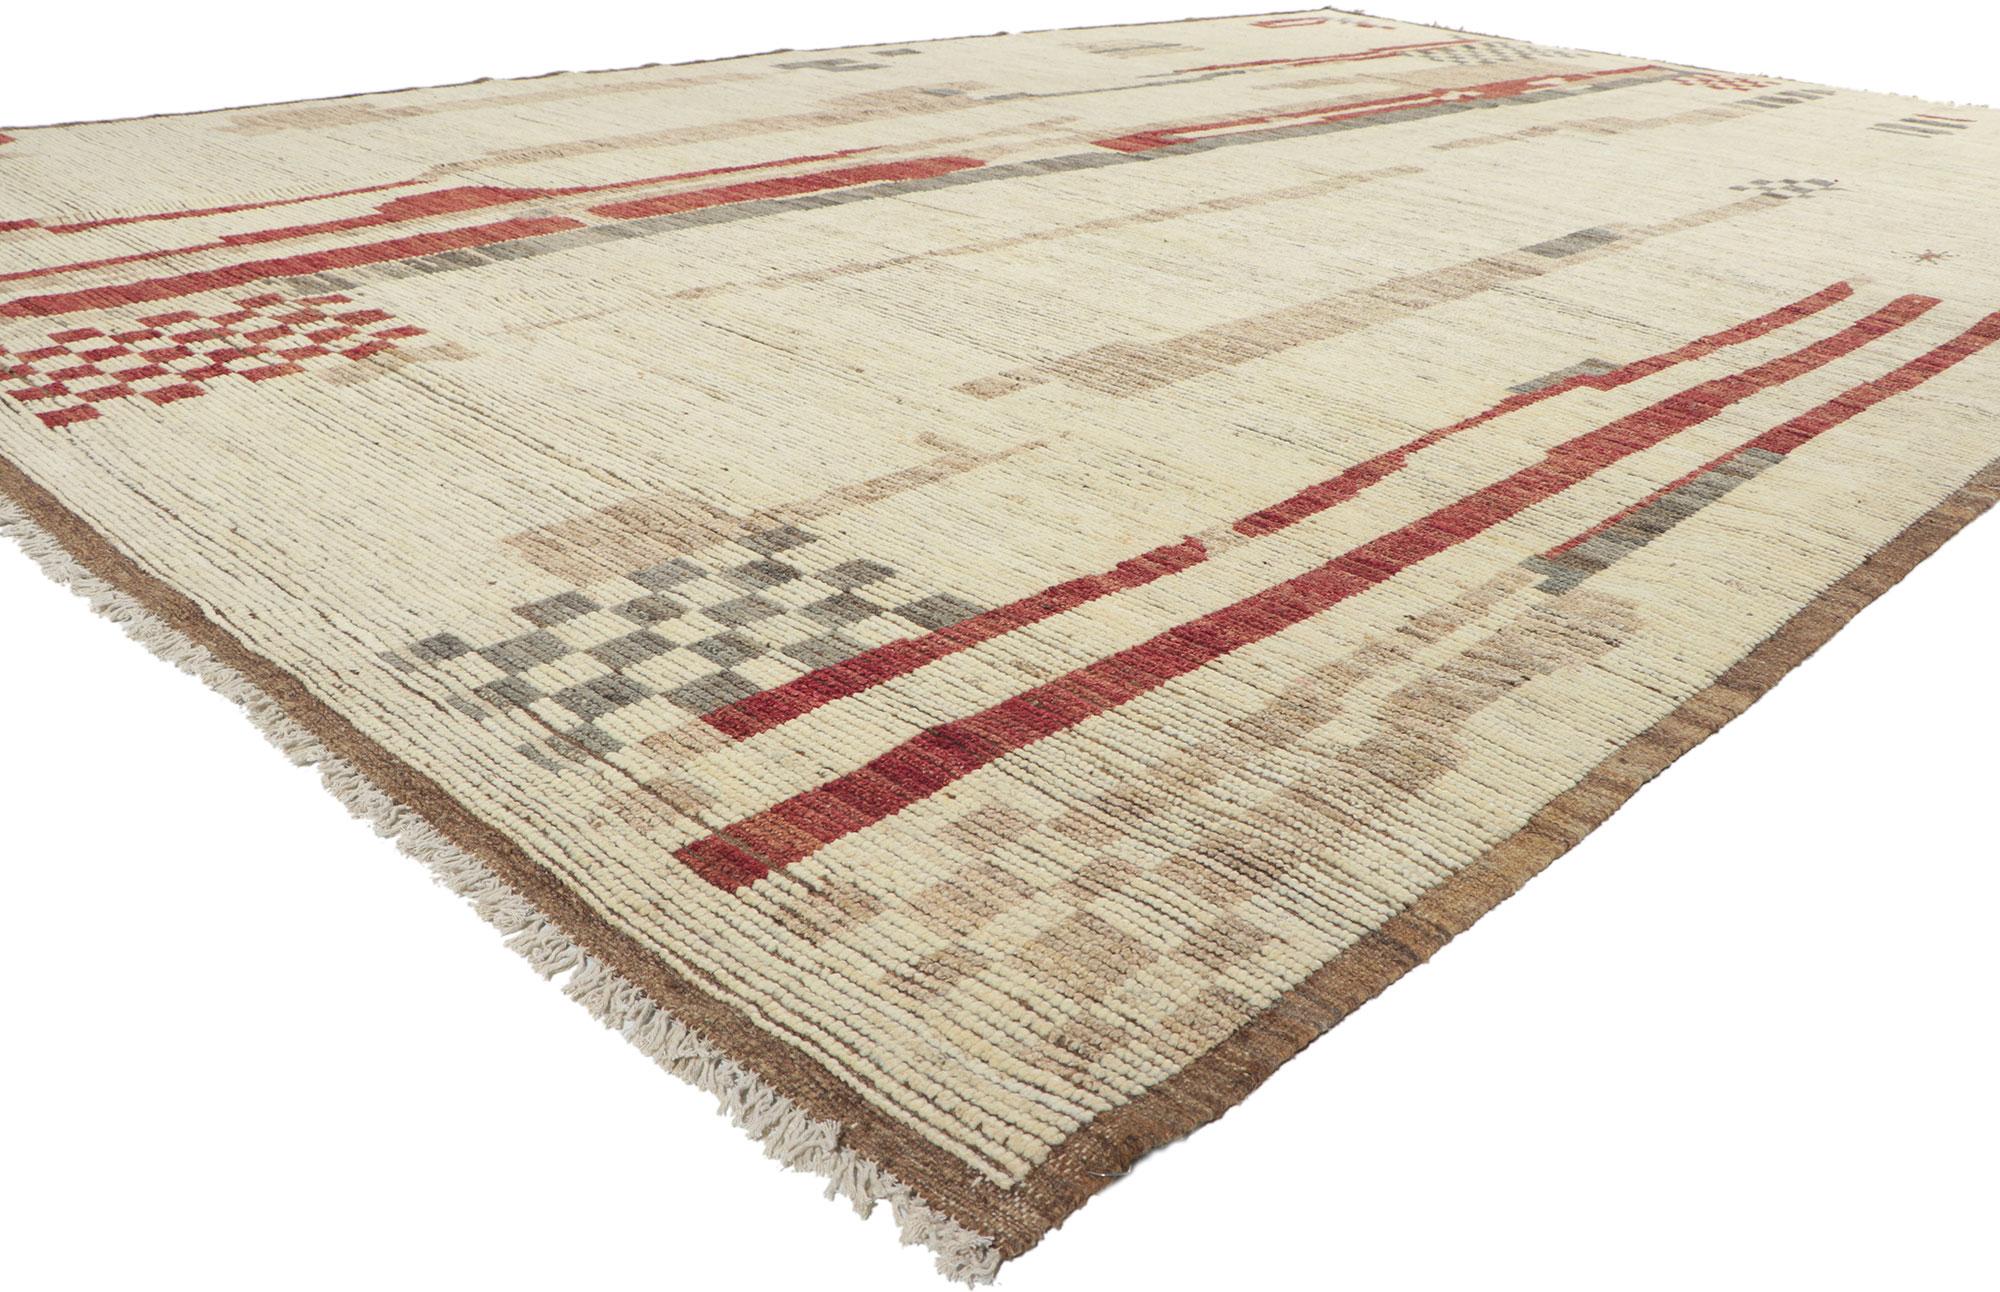 80949 new Contemporary Moroccan rug inspired by Gunta Stolz and Bauhaus Style, 09'07 x 14'03. Showcasing an abstract linear design, incredible detail and texture, this hand knotted wool contemporary Moroccan area rug is a captivating vision of woven